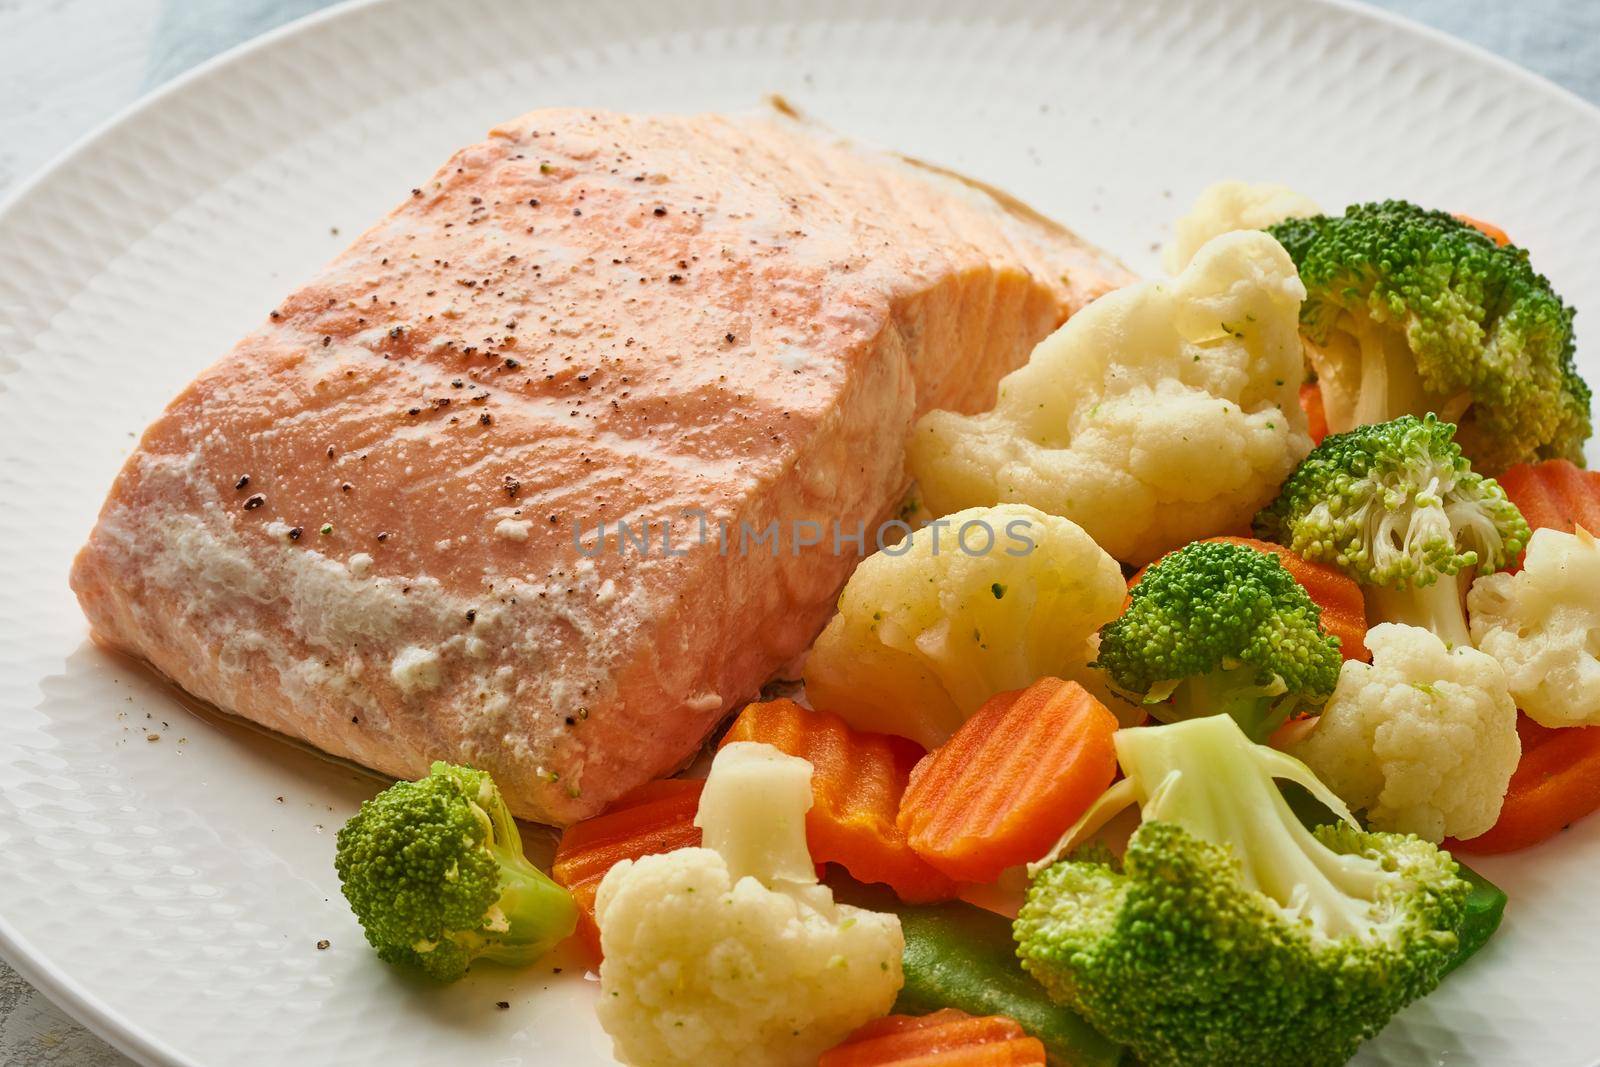 Steam salmon and vegetables, Paleo, keto, fodmap, dash diet. Mediterranean diet with steamed vegetables and fish. Healthy concept, white plate on a gray table, gluten free, lectine free, macro